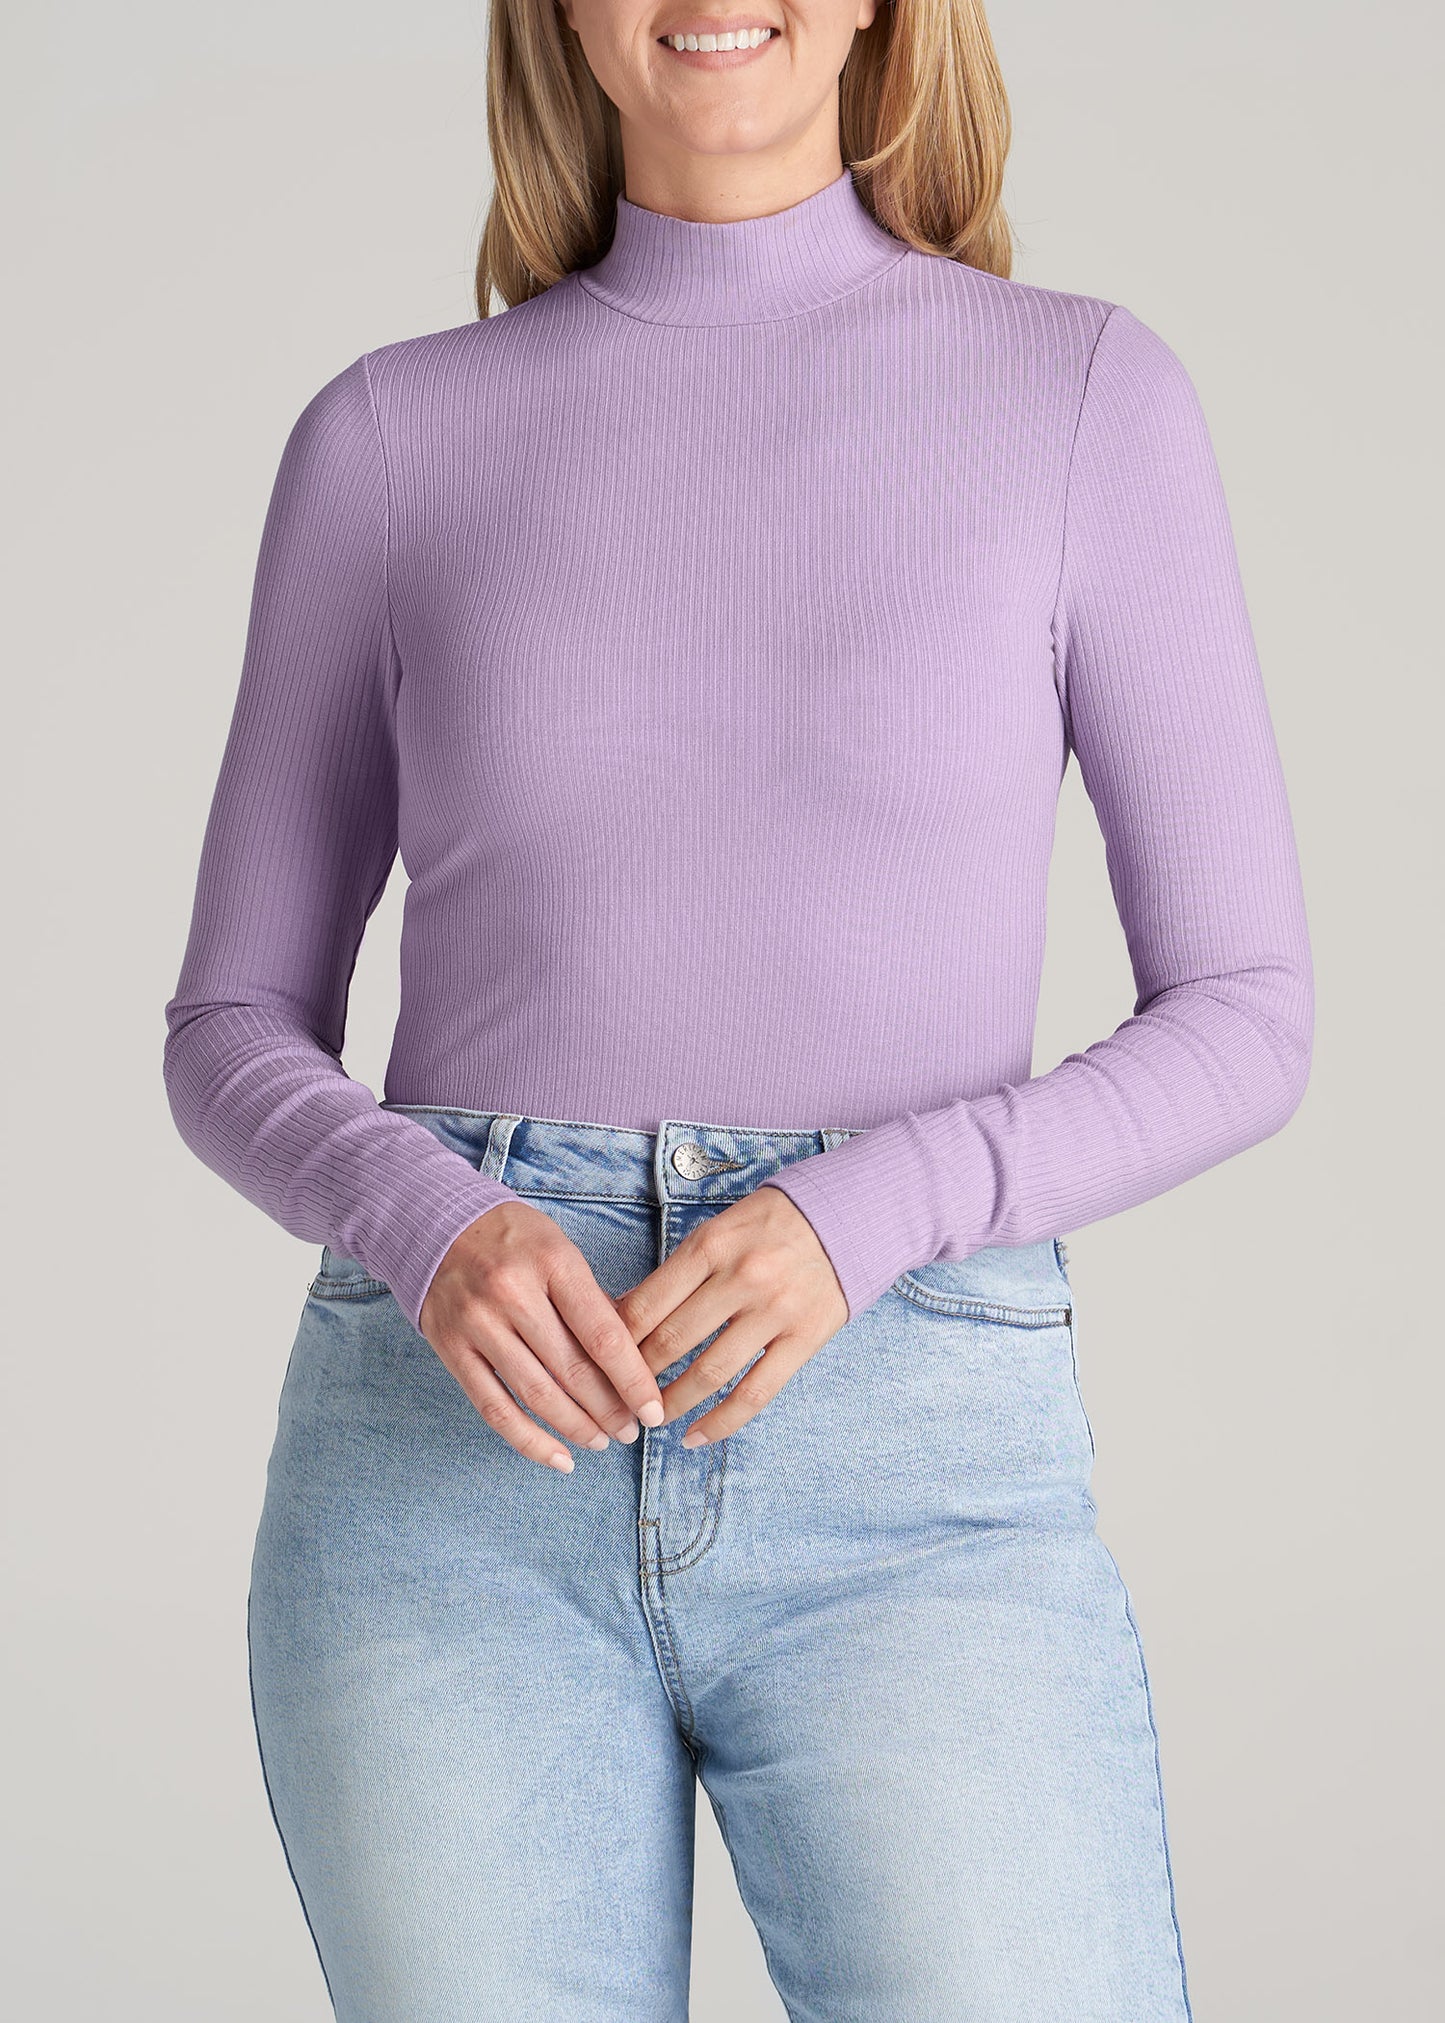 YWDJ Womens Tops Long Sleeve Solid with Notch Neck Long Sleeve Purple XL